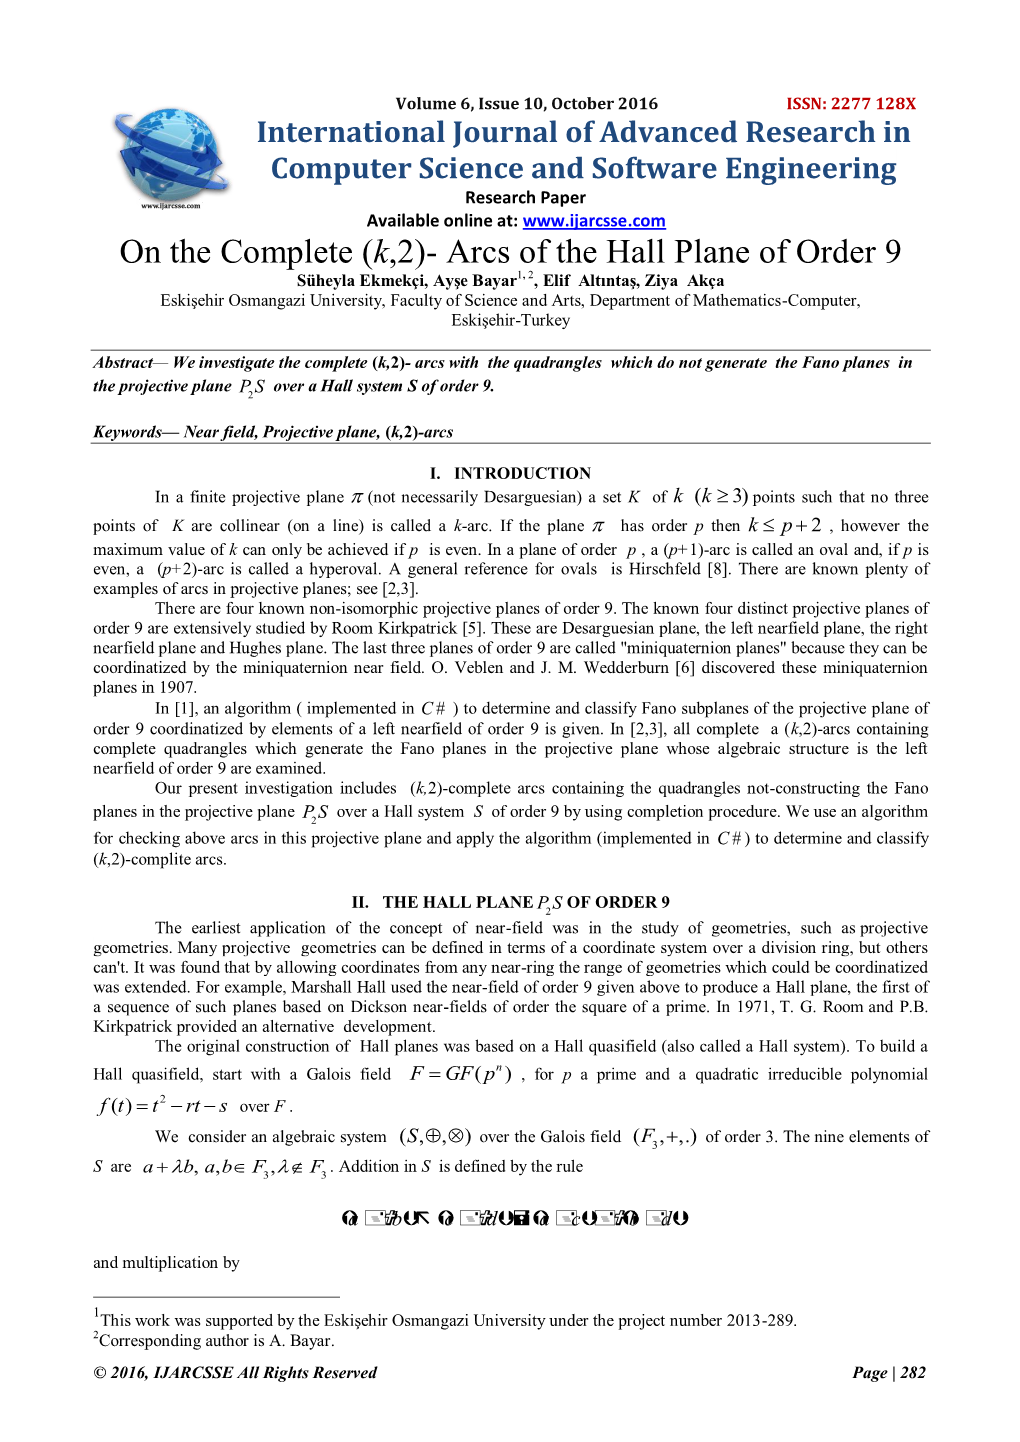 (K,2)- Arcs of the Hall Plane of Order 9